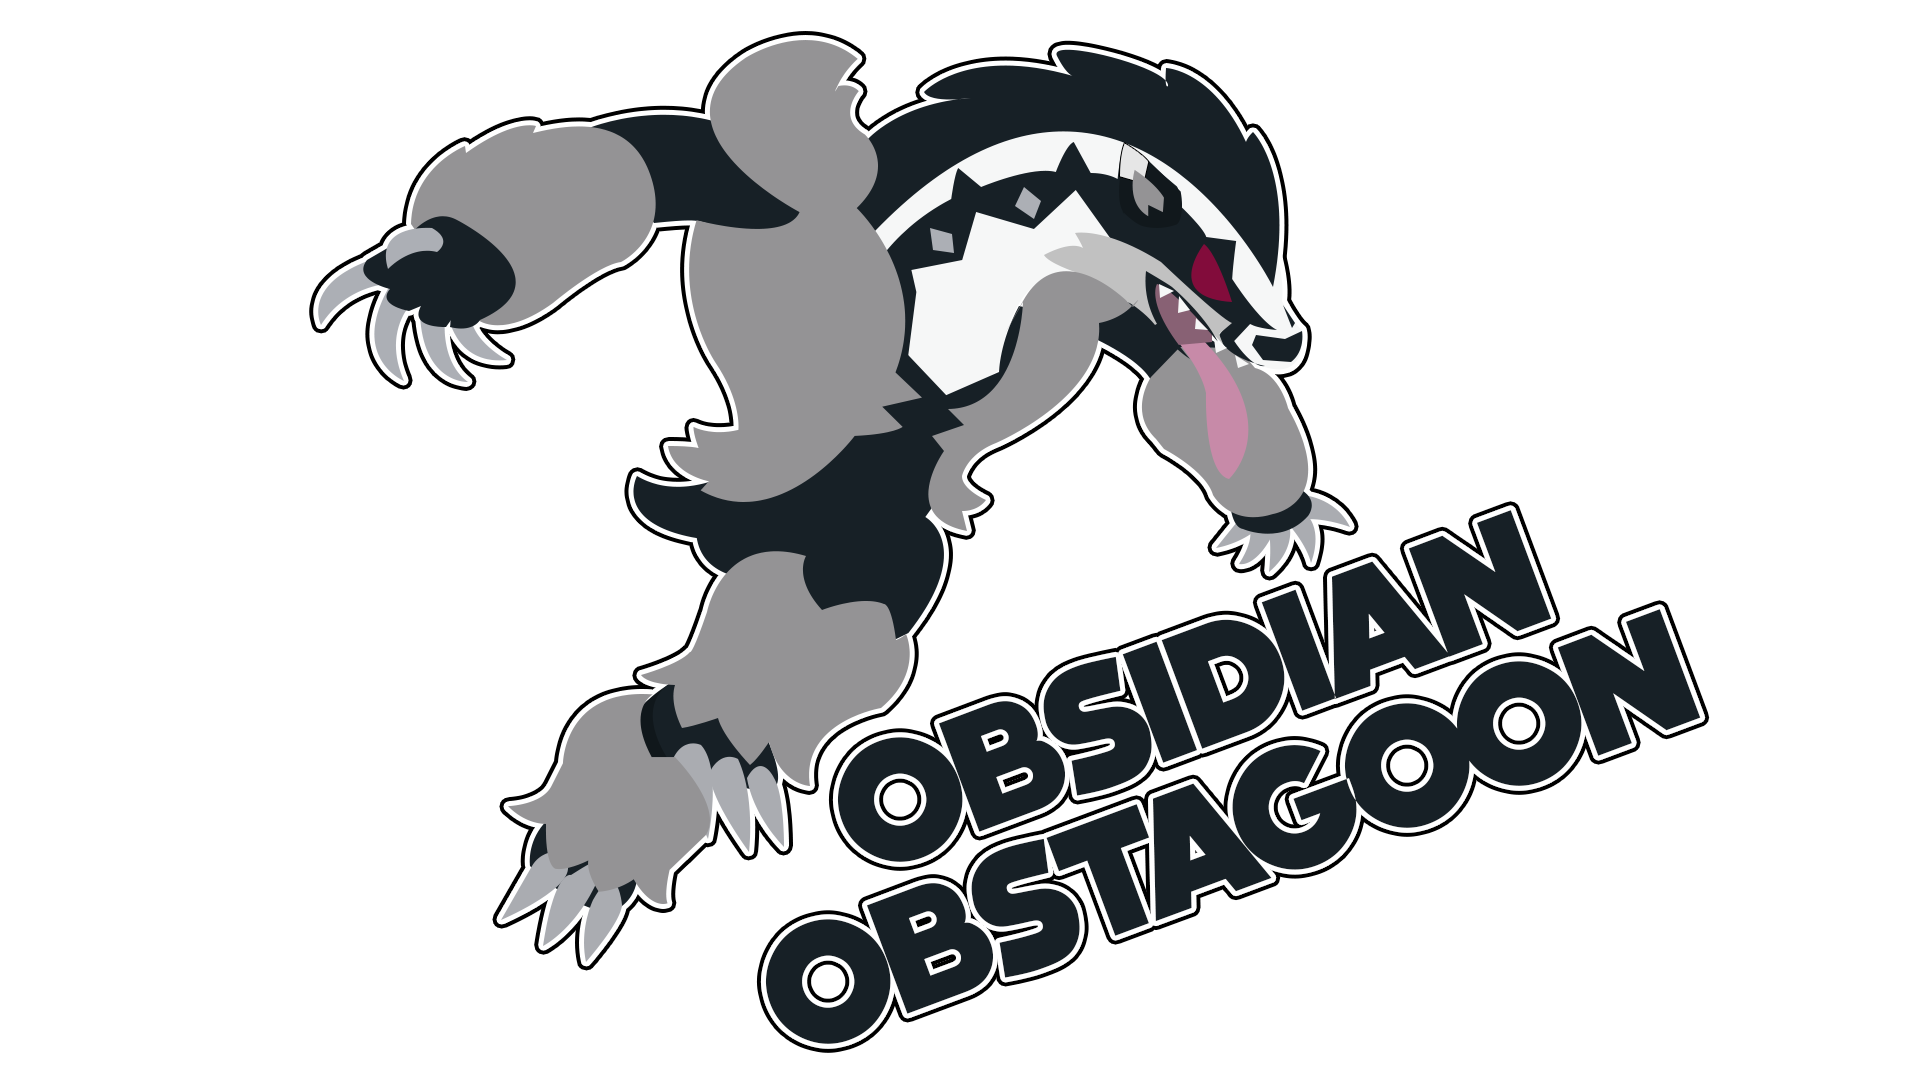 Obstagoon Hd Wallpapers